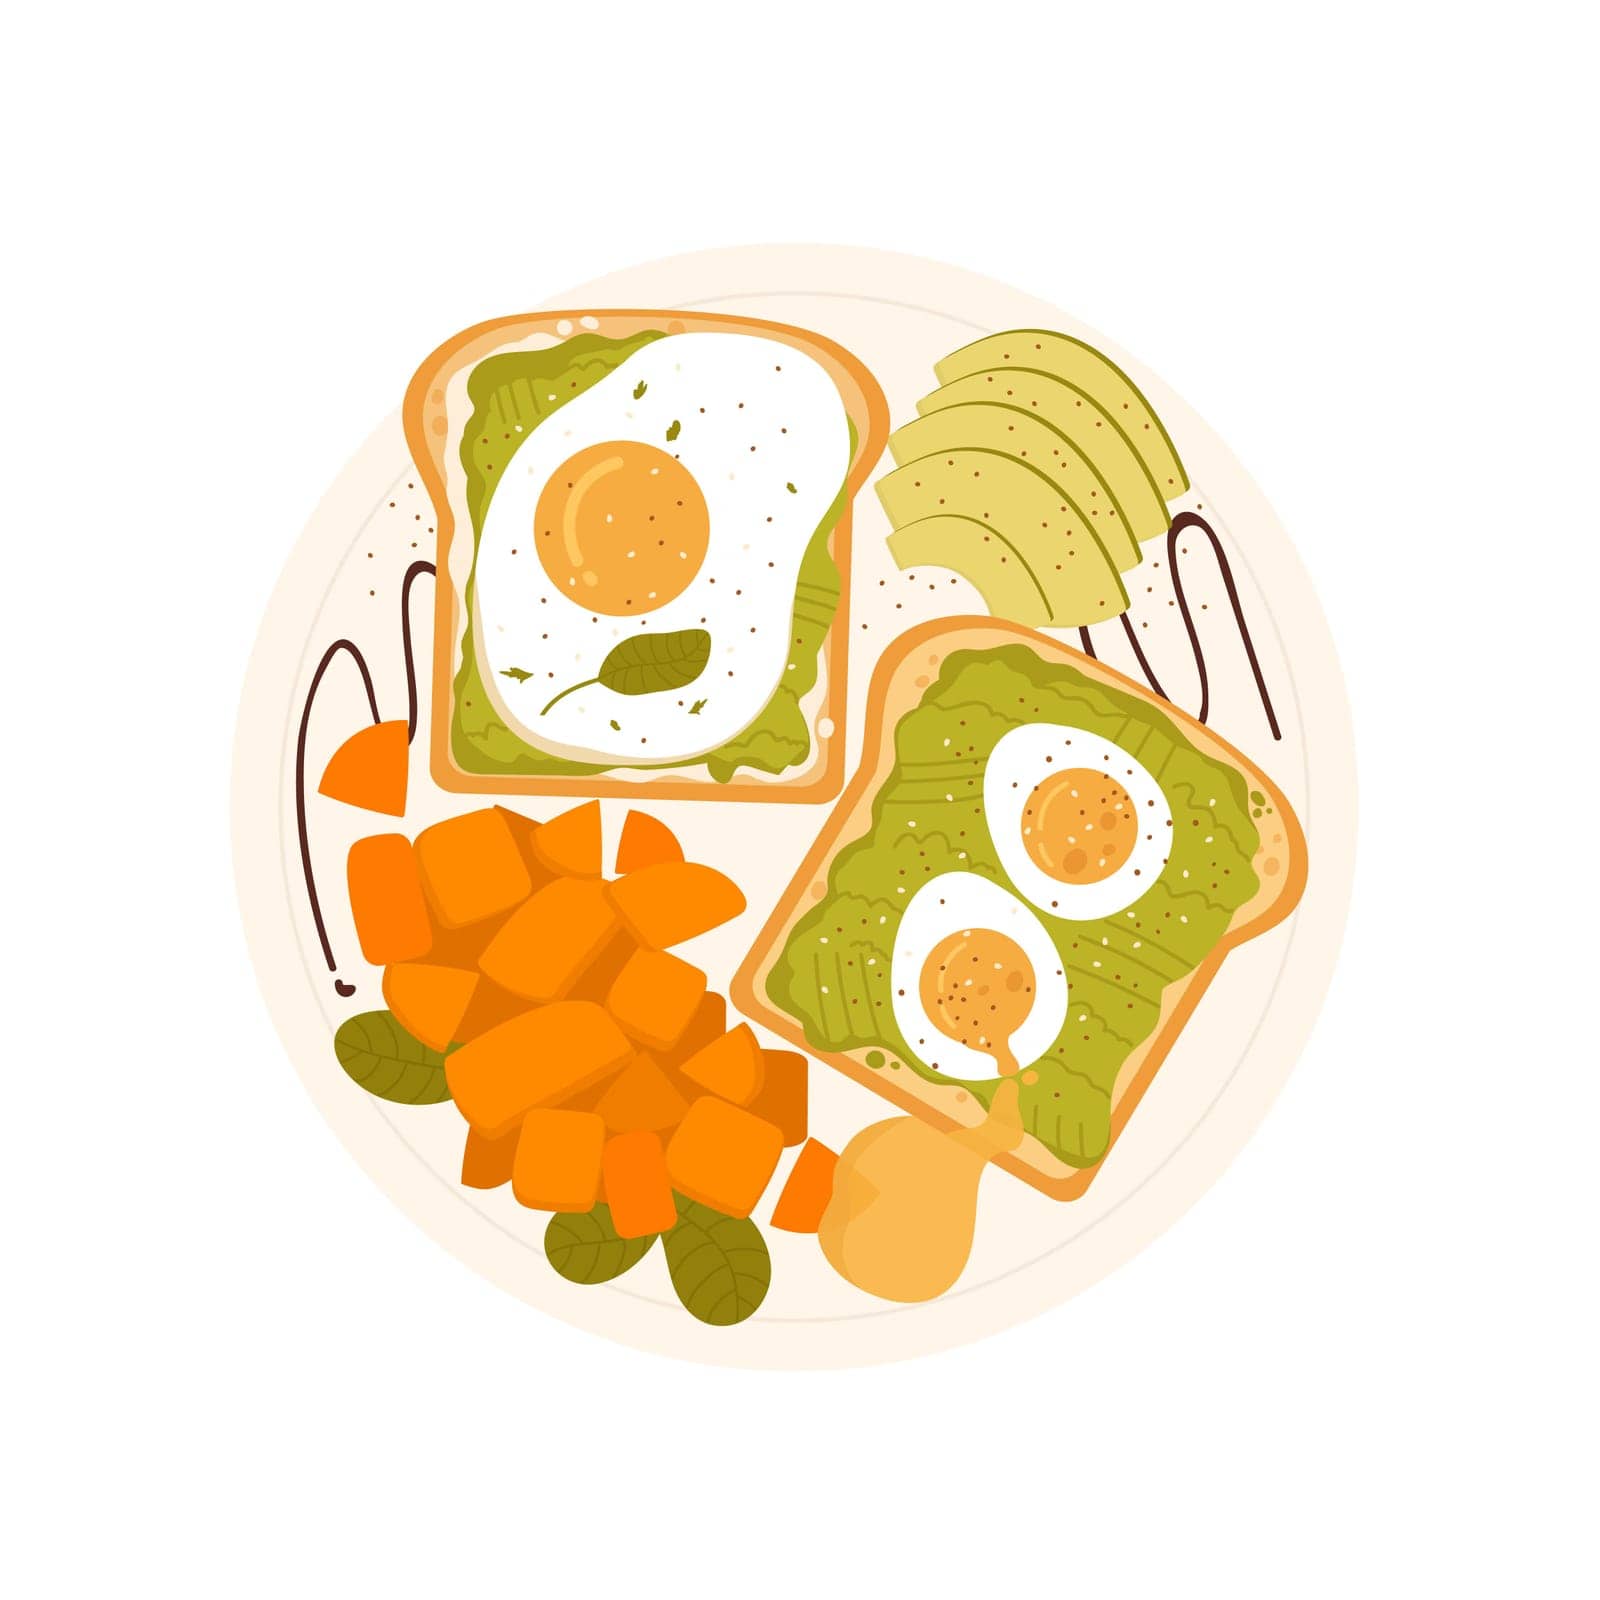 Top view of breakfast toasts with eggs. Morning dish avocado sandwiches isolated illustration